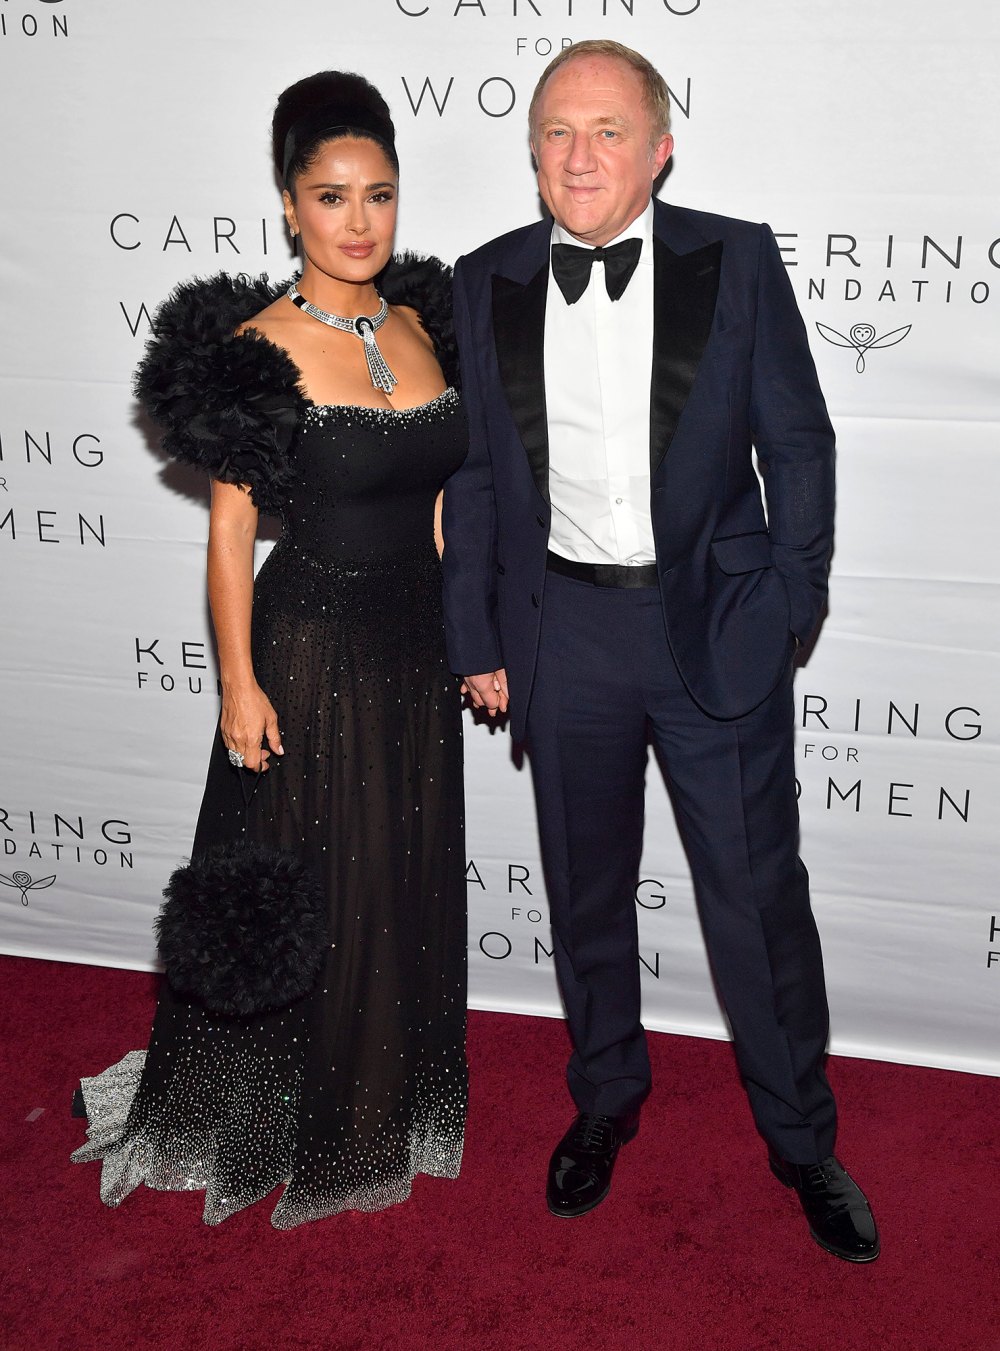 Salma Hayek Had Phobia of Getting Married but Got Over It